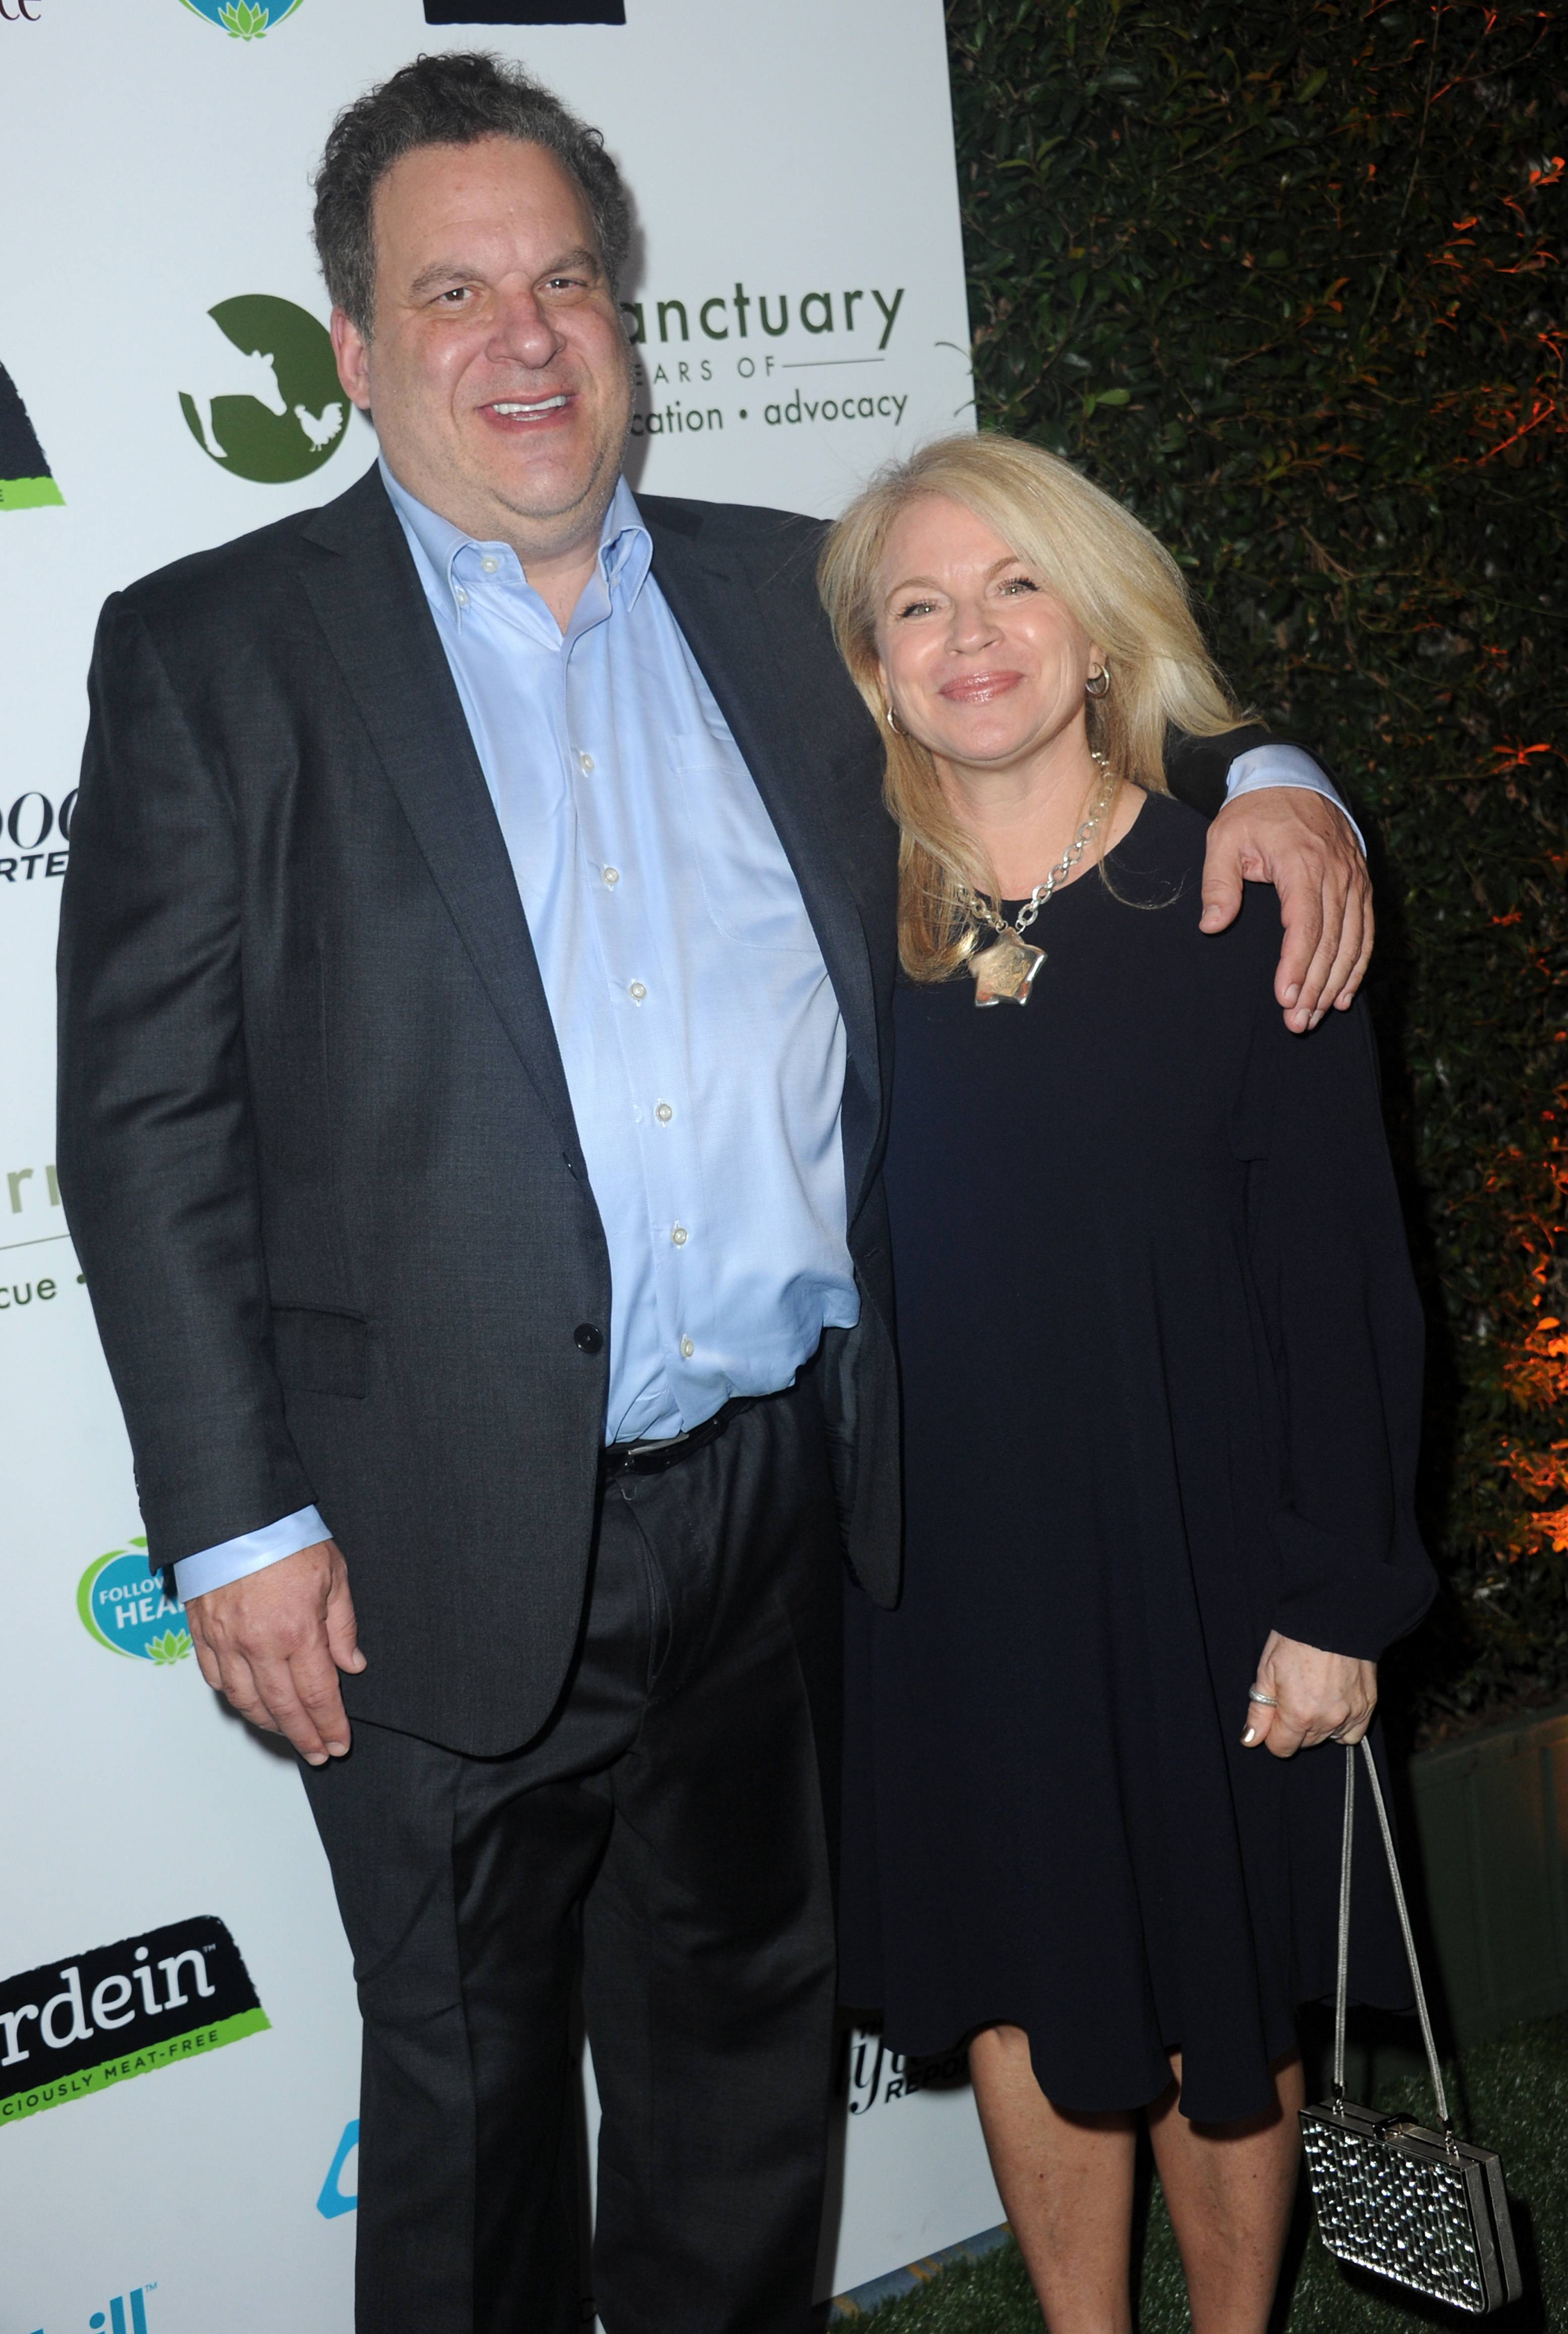 Jeff Garlin and ex-wife Marla at the Beverly Wilshire Four Seasons Hotel on November 12, 2016, in Beverly Hills, California. | Source: Getty Images